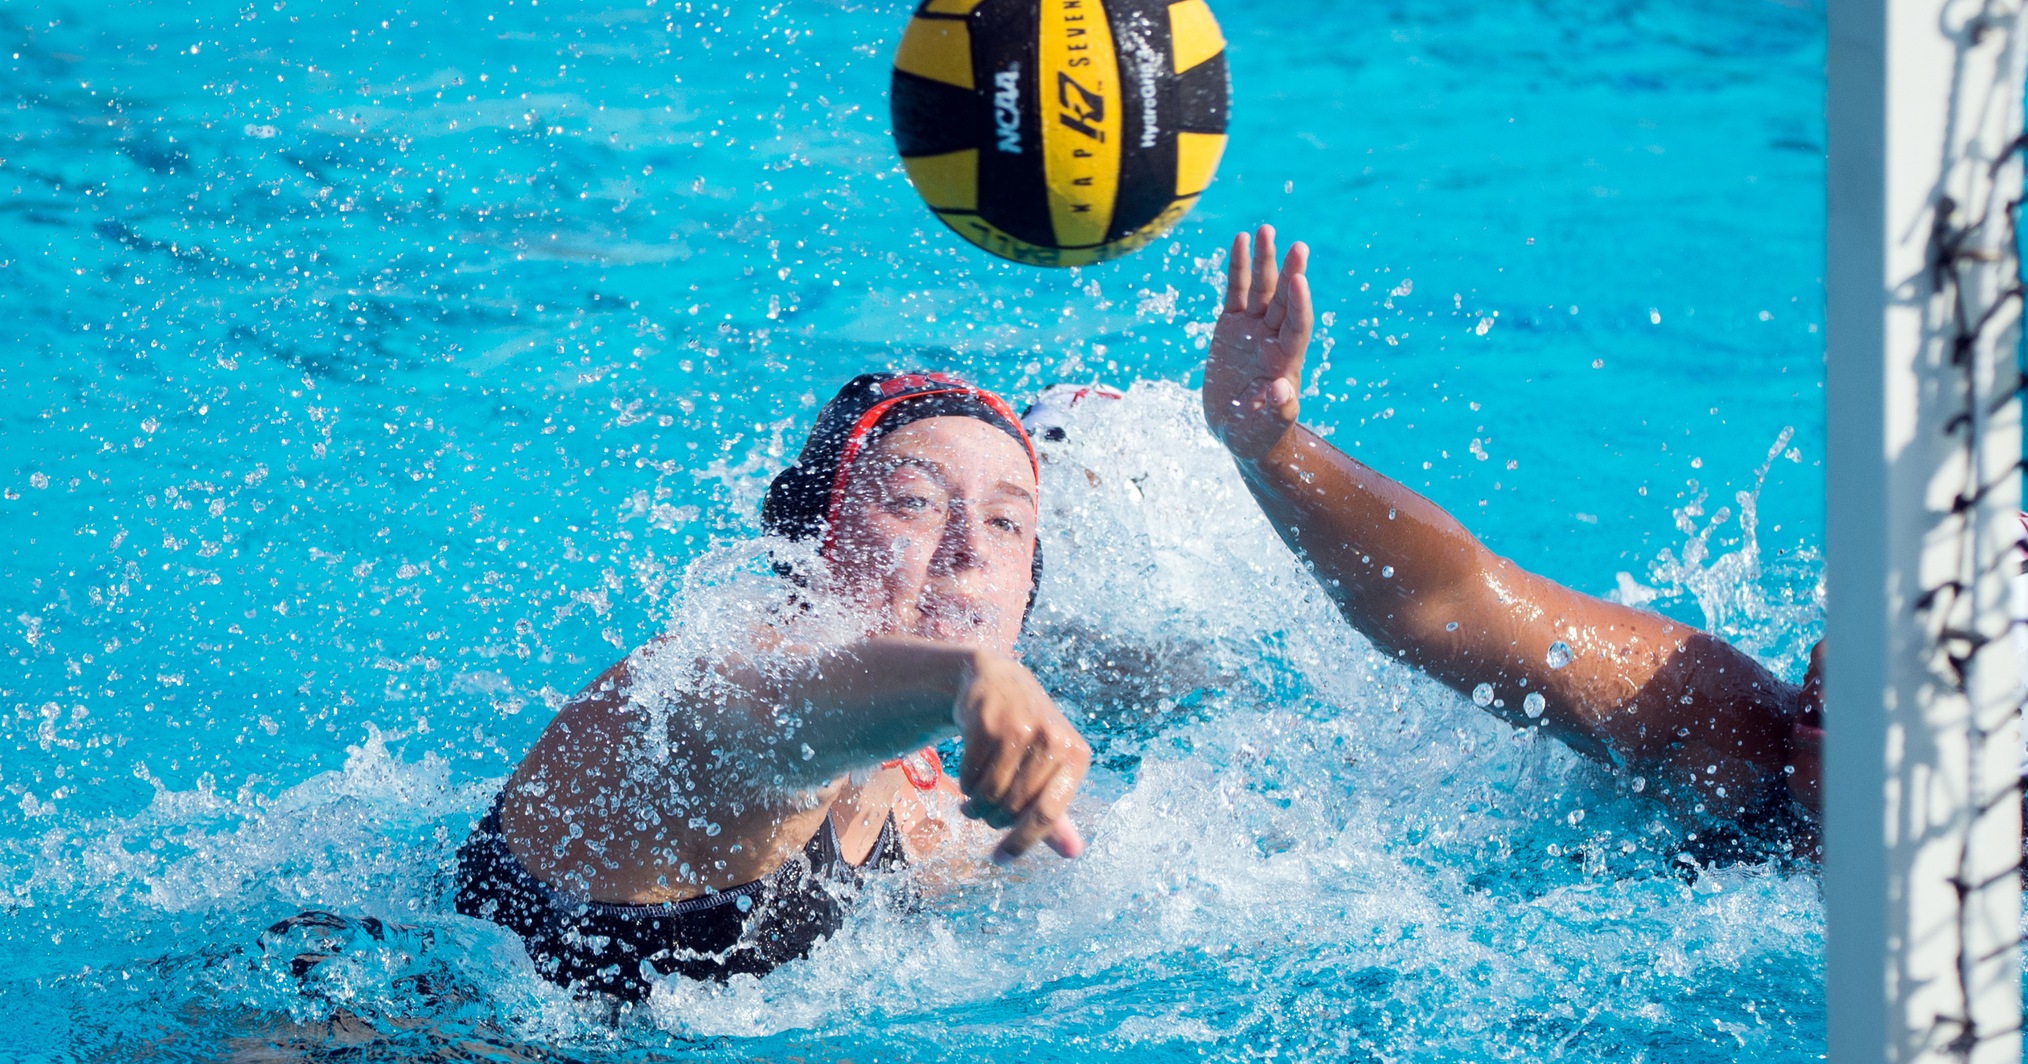 Freshman Kate Fox scored three goals in her first-career CCCAA Southern California Regional game leading to a 10-8 win over Citrus. (Photos by Michael Leone)